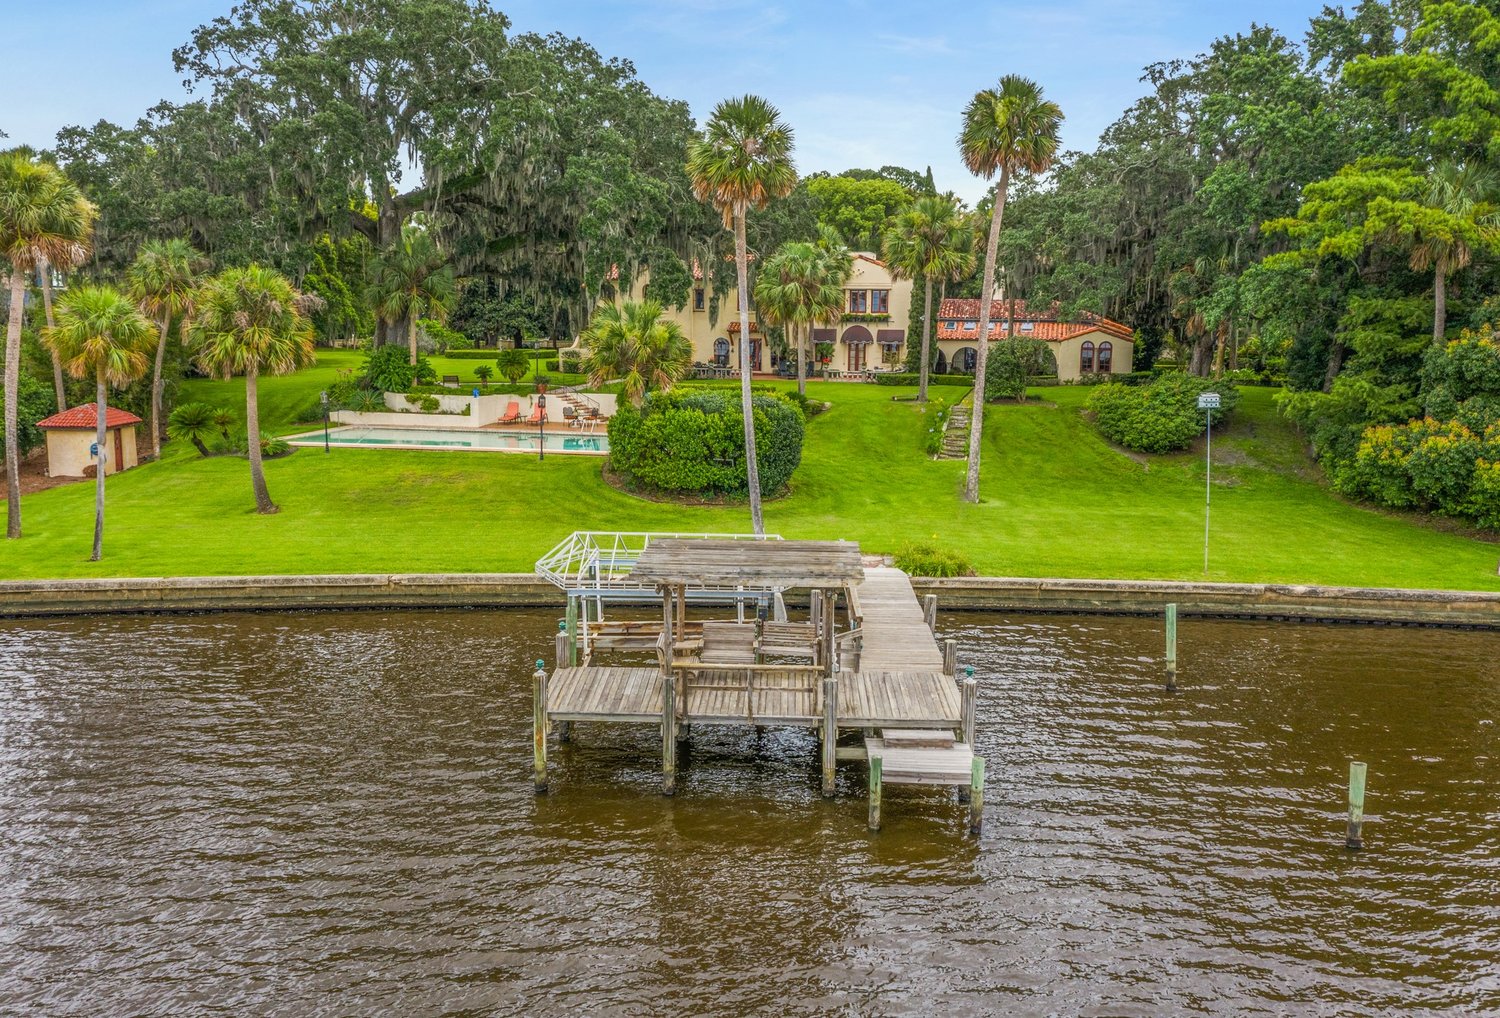 The Carl S. Swisher Estate at 2234 River Road is a Mediterranean Revival house constructed in 1929-30. The property has 145 feet of river frontage.